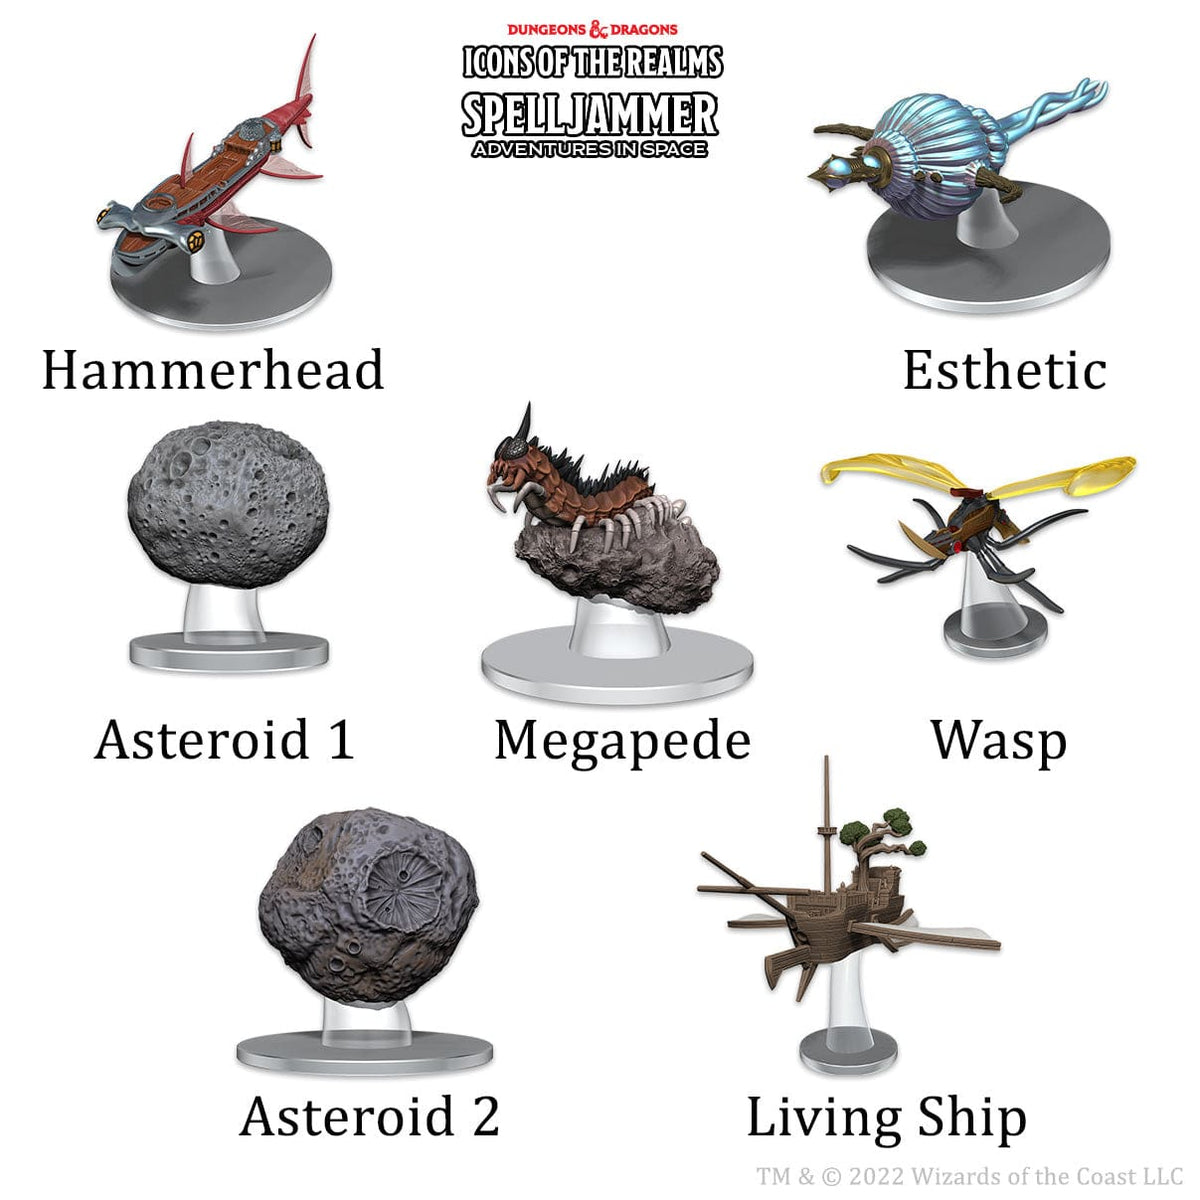 Icons of the Realms: Spelljammer - Asteroid Encounters (Ship Scale) - Third Eye